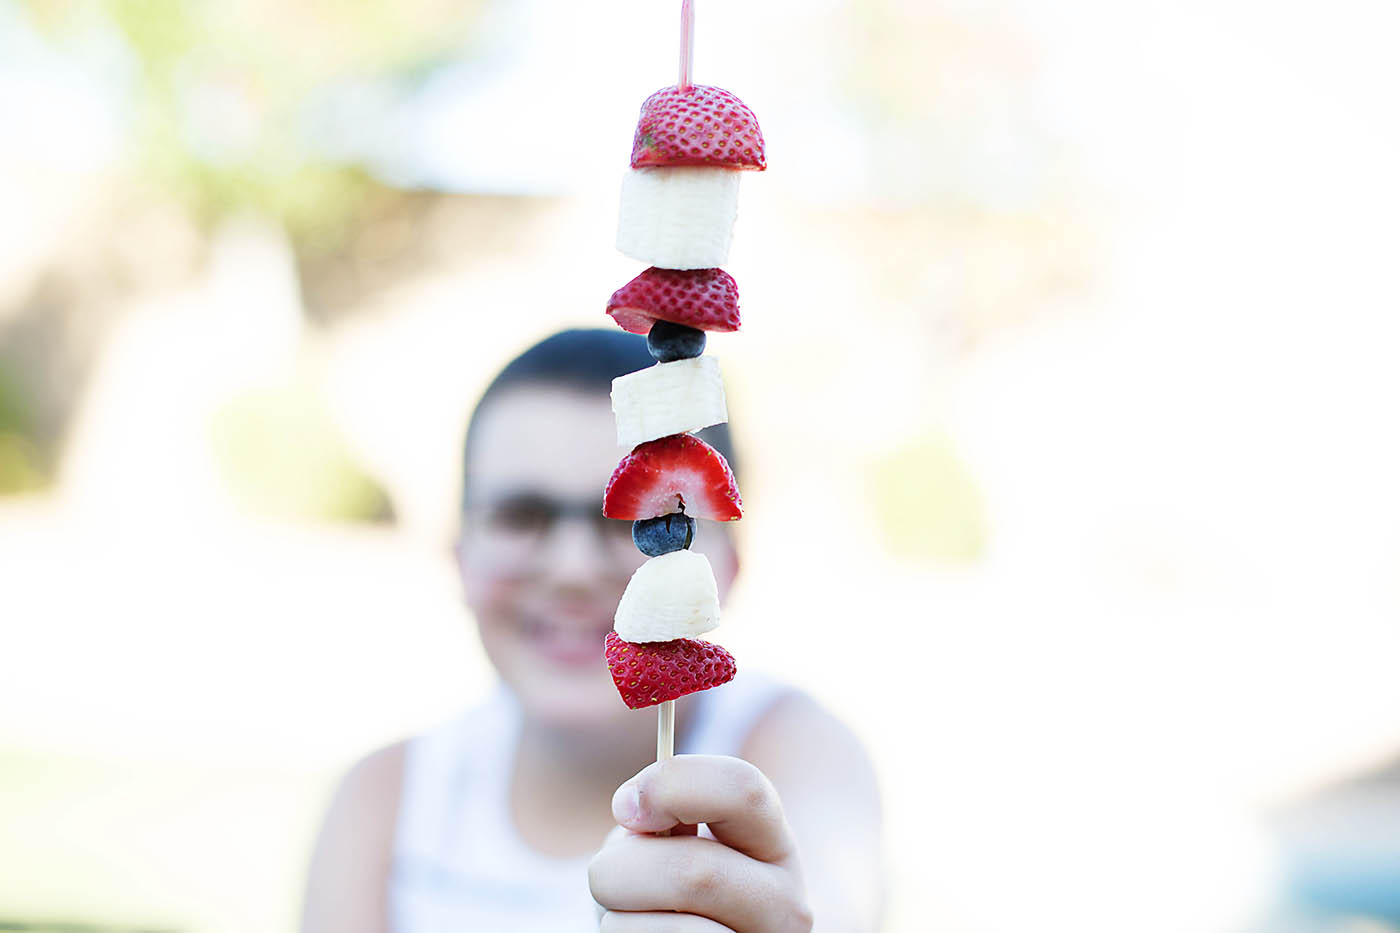 Poolside snack ideas - on a stick. Easy to eat AND clean up!